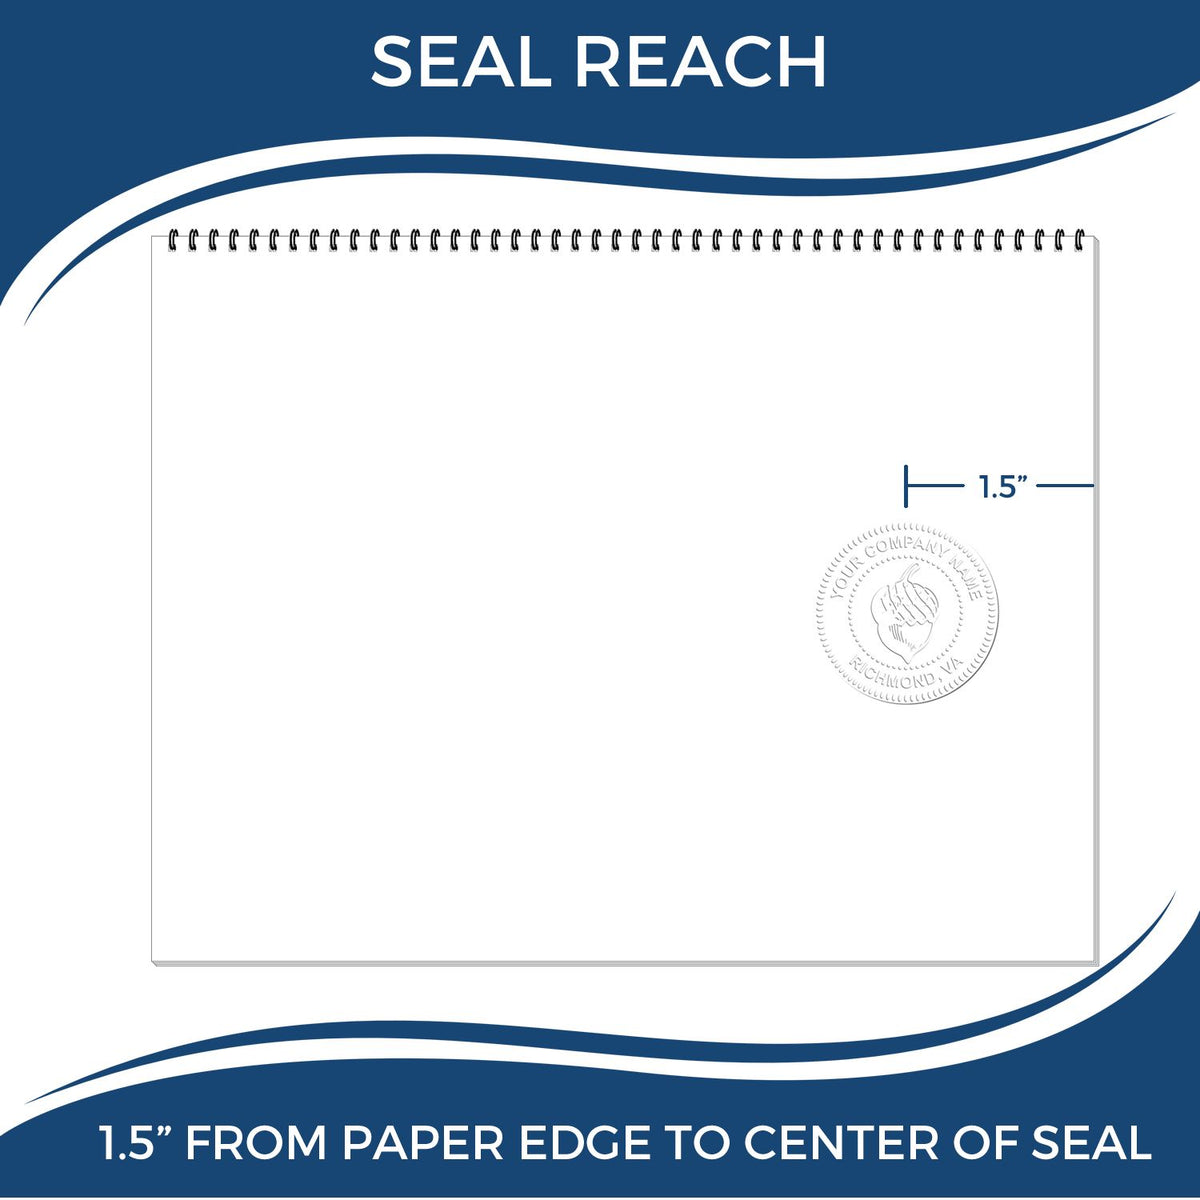 An infographic showing the seal reach which is represented by a ruler and a miniature seal image of the State of Vermont Architectural Seal Embosser